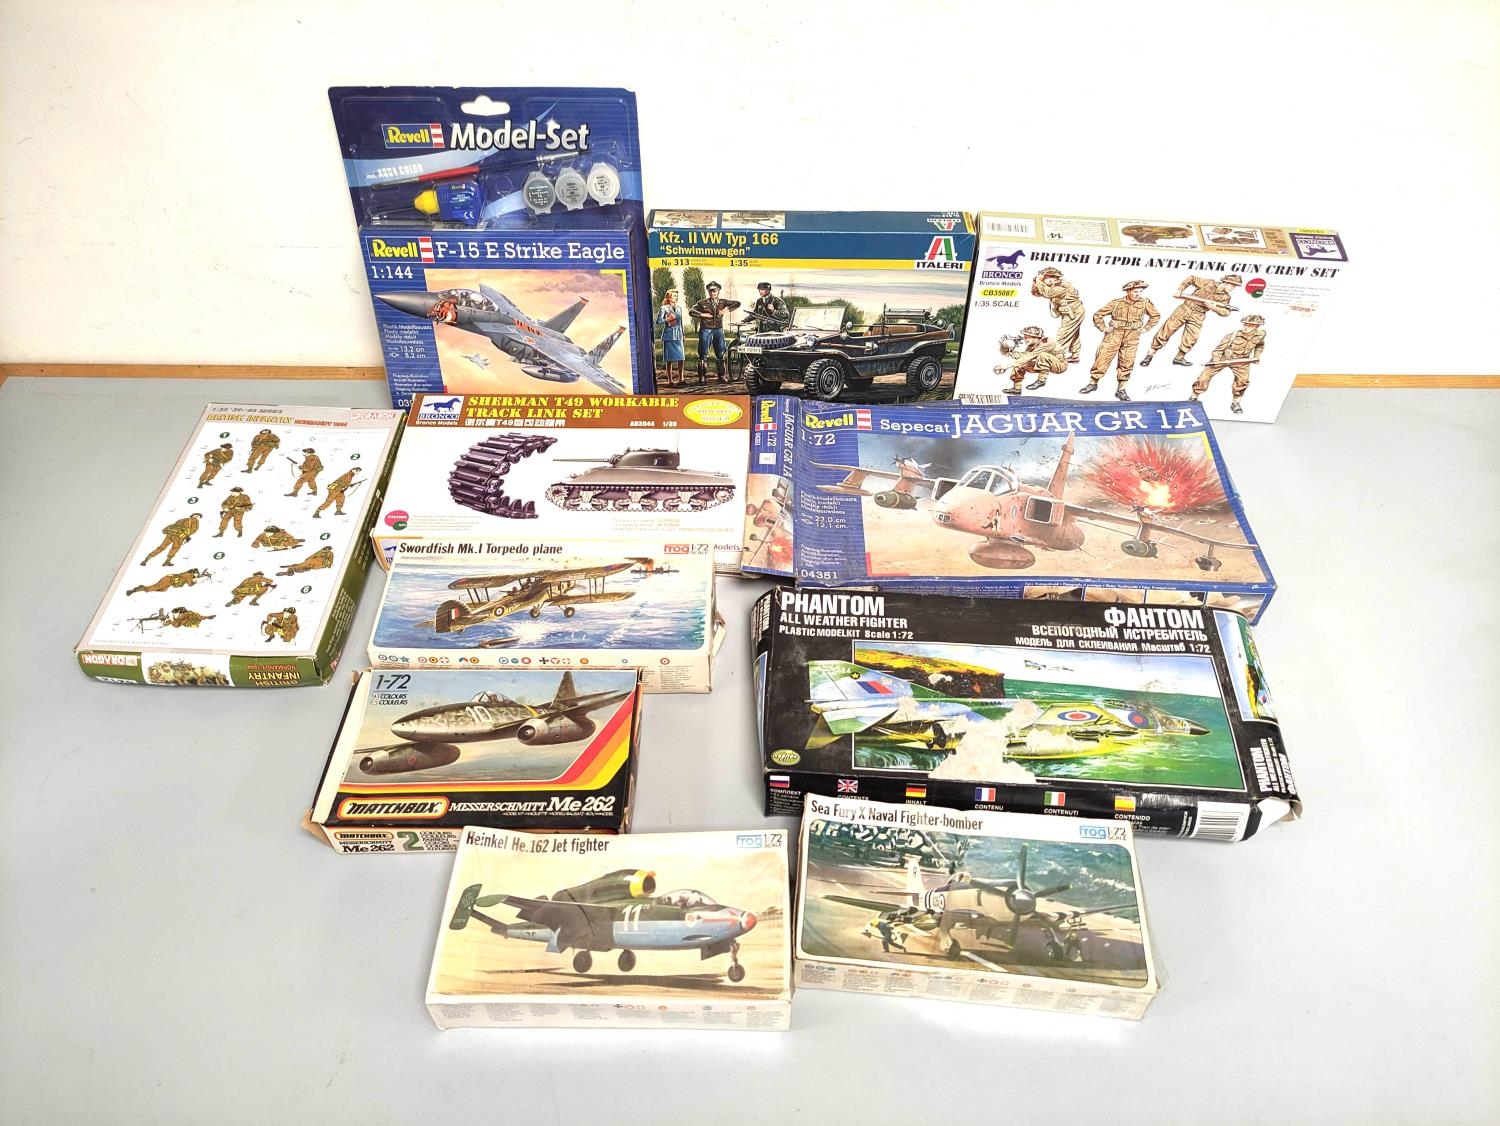 Collection of boxed model construction kits to include a Revell 1:144 scale F-15 E Strike Eagle